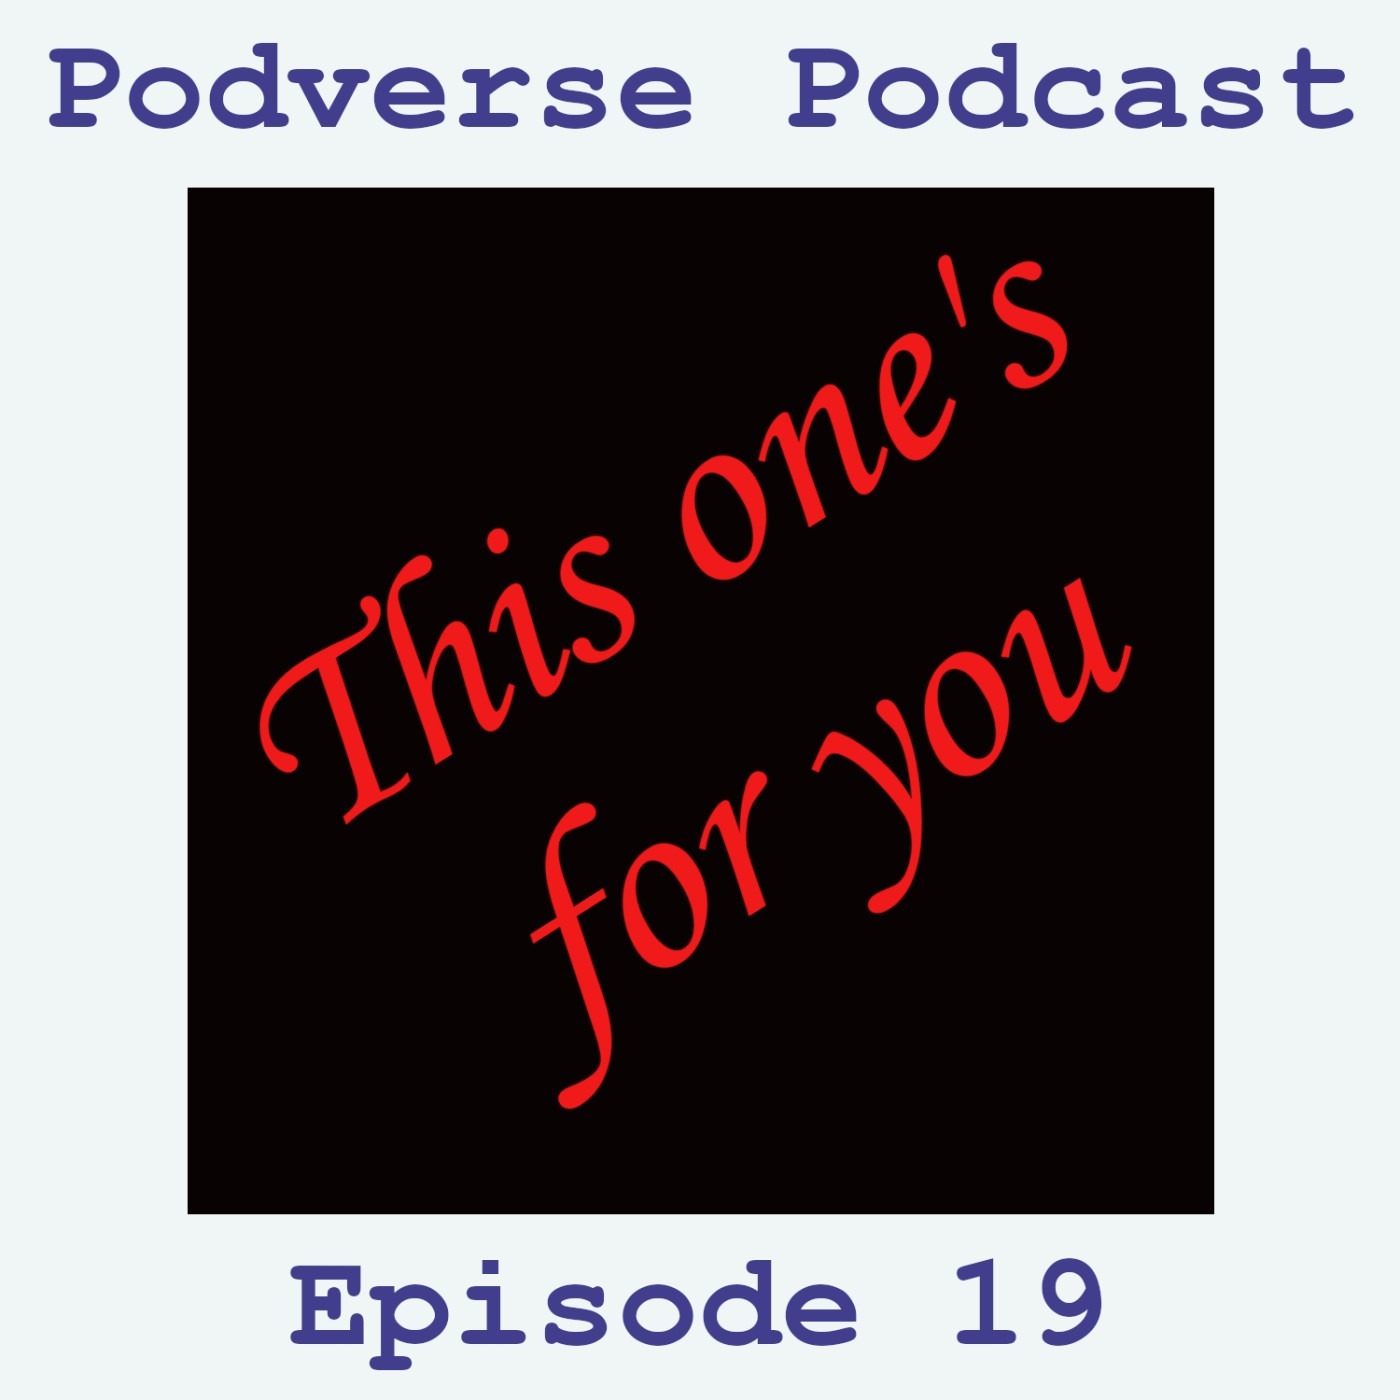 This one's for you! - Episode 19